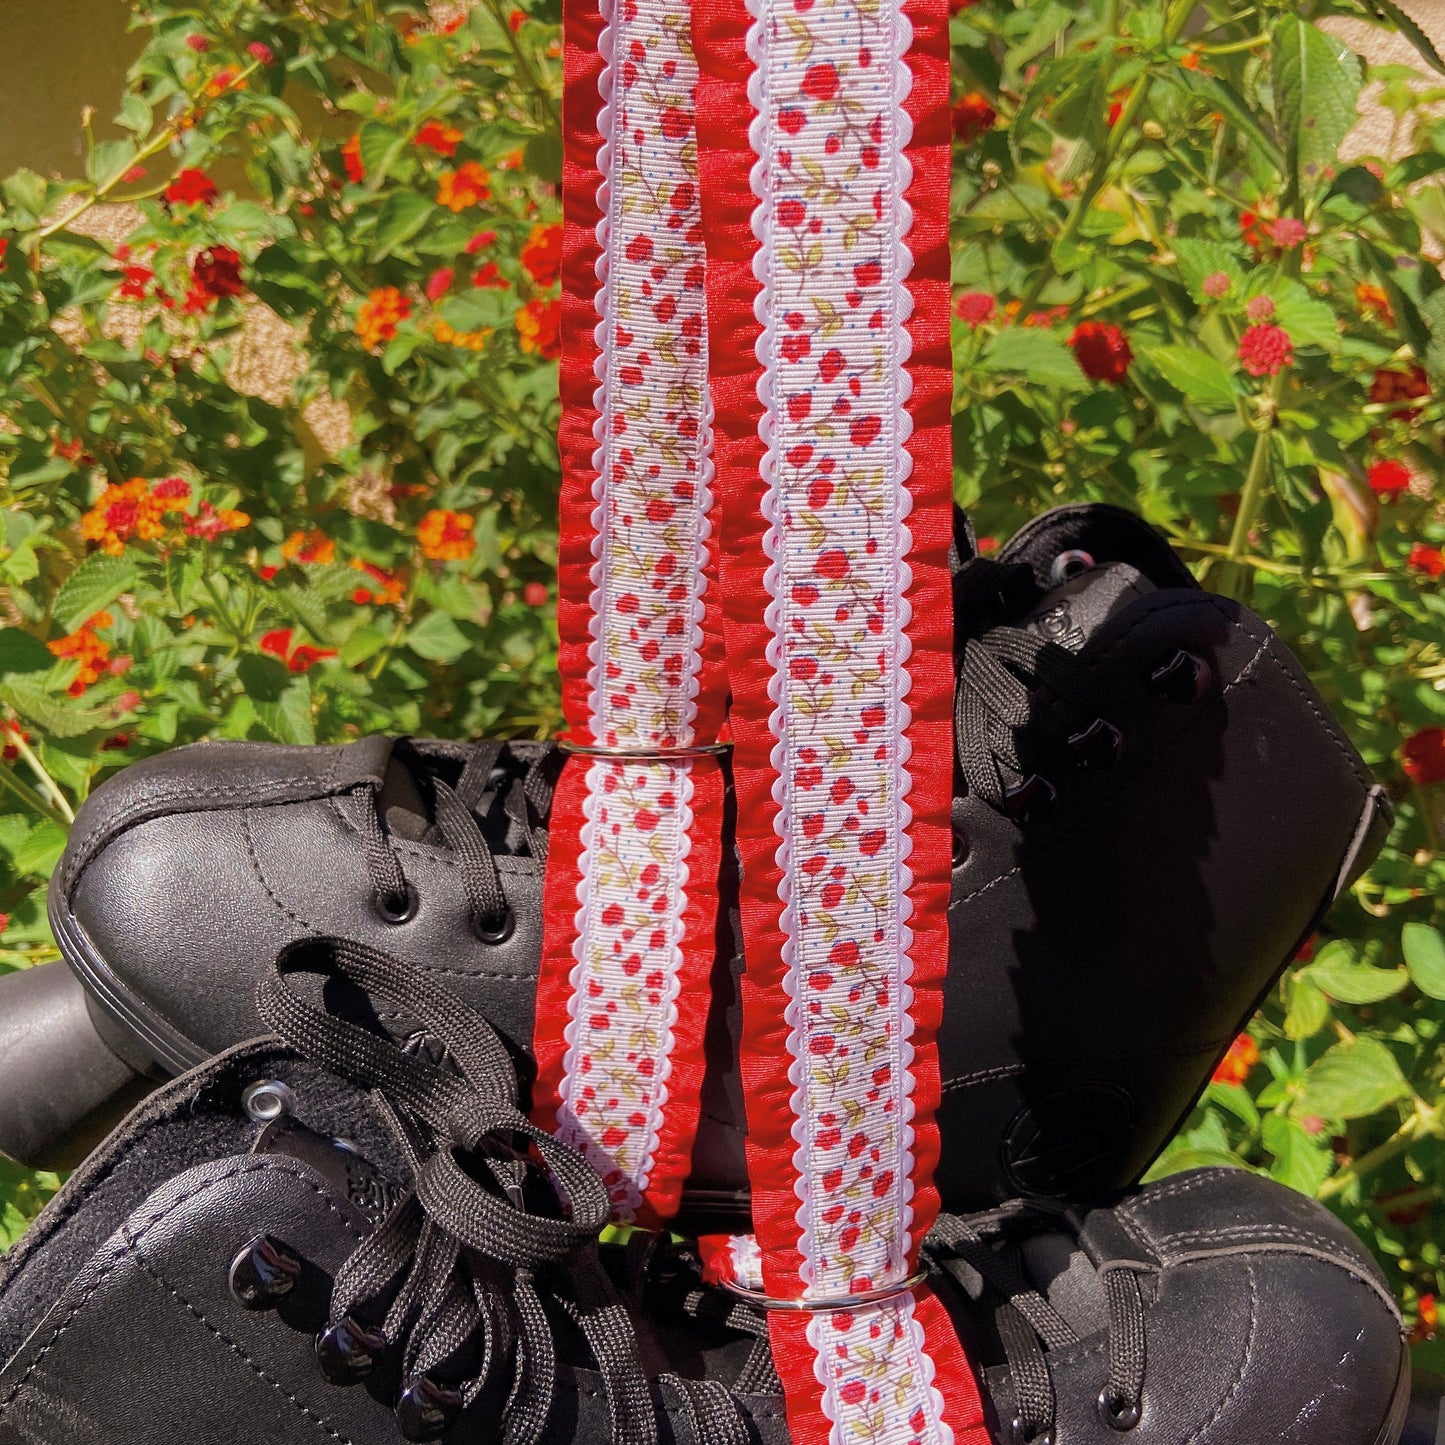 Red Floral Ruffle Roller Skate Leash